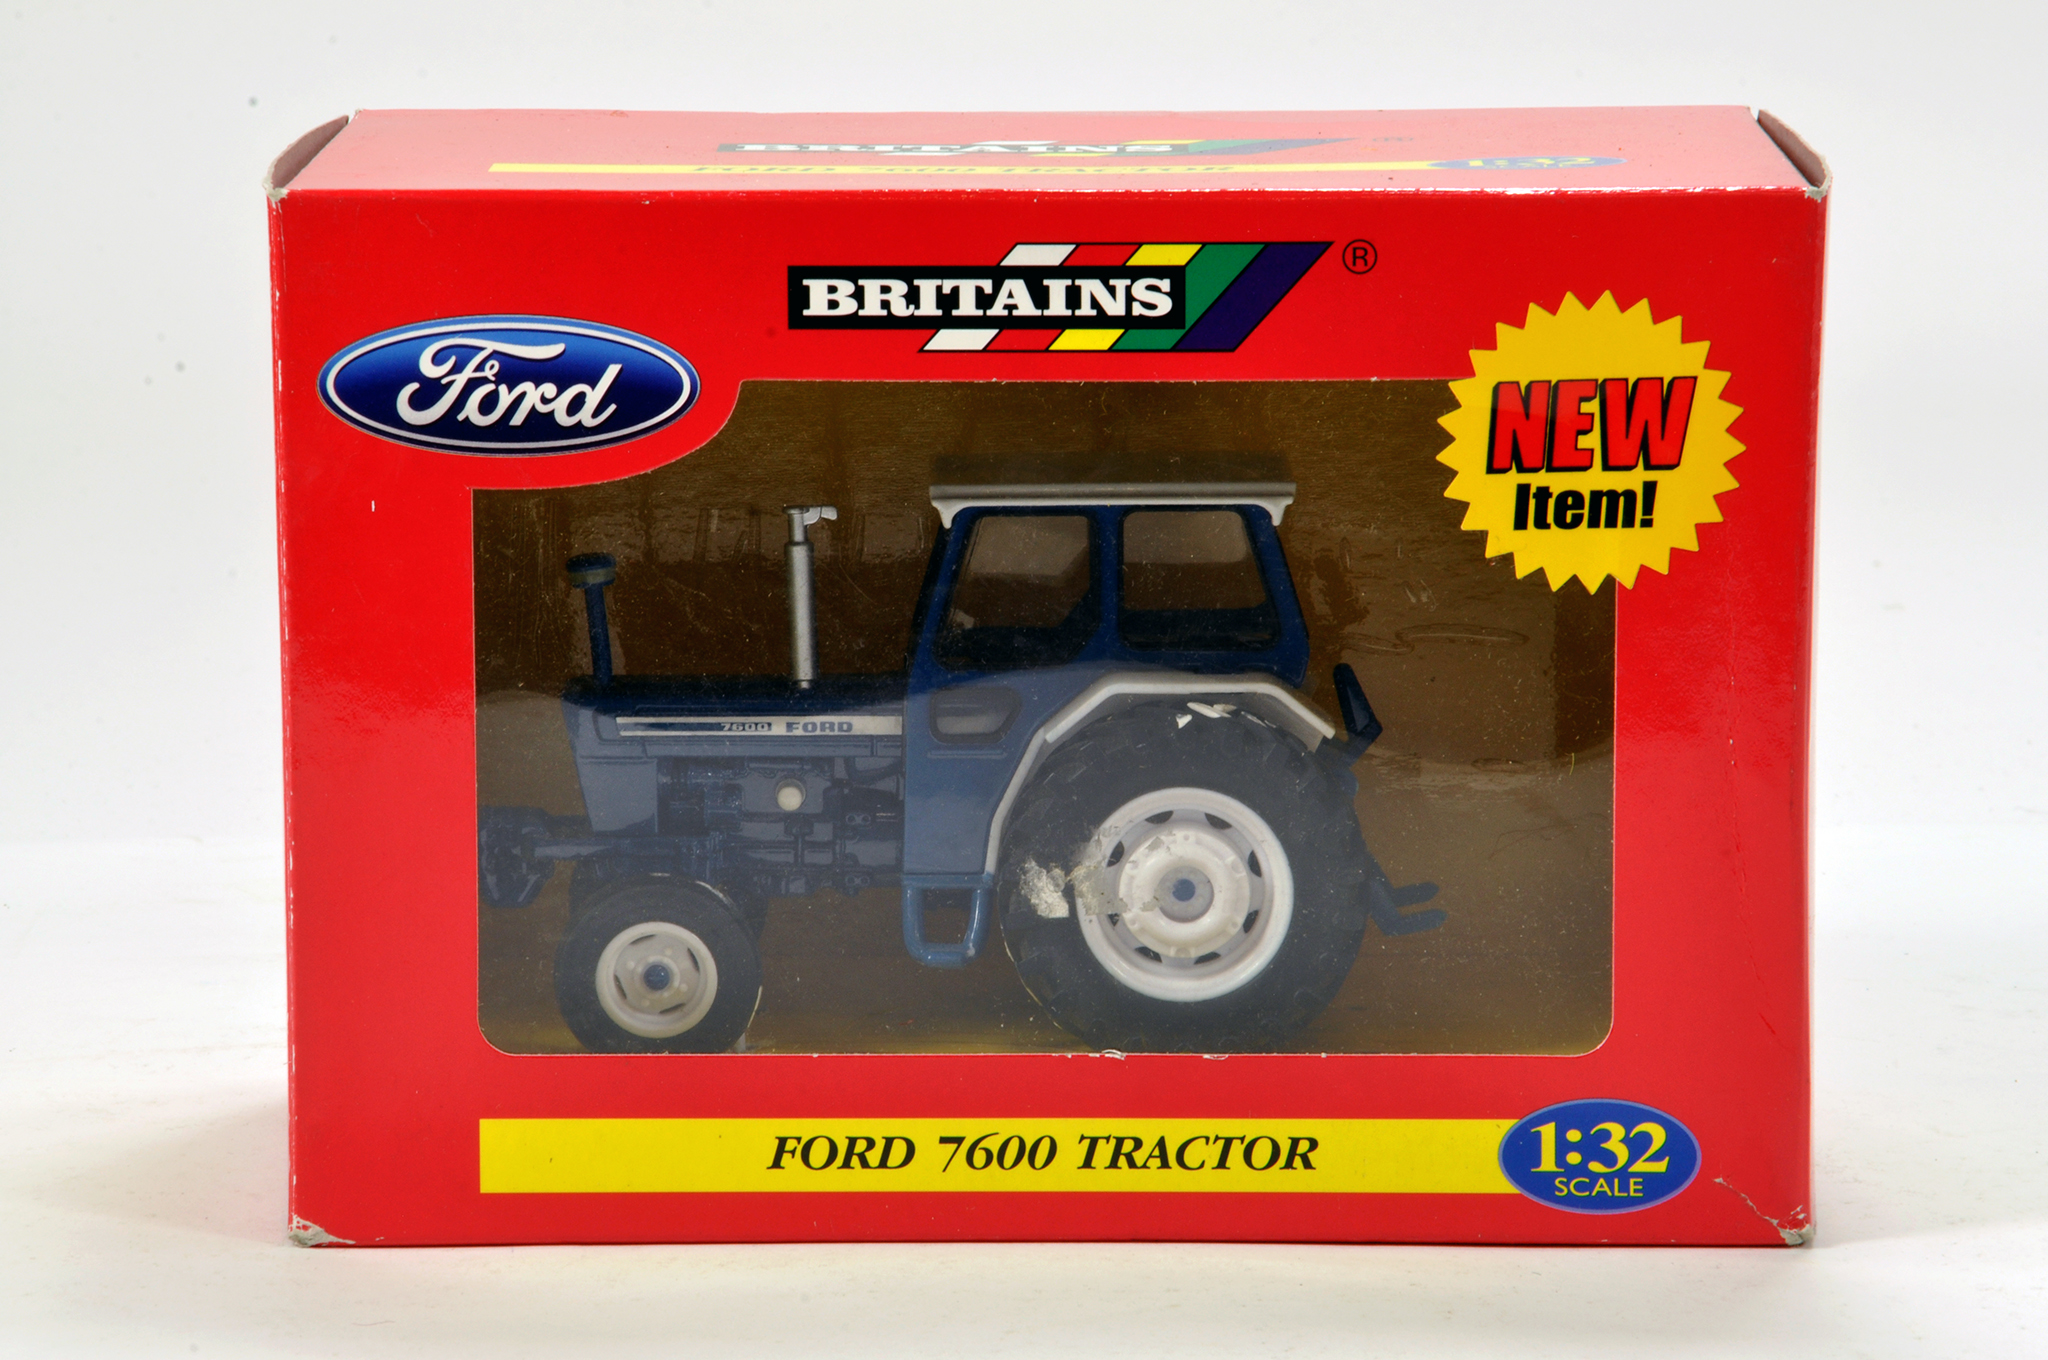 Britains 1/32 Farm Issue comprising Ford 7600 Tractor. Generally E to NM.